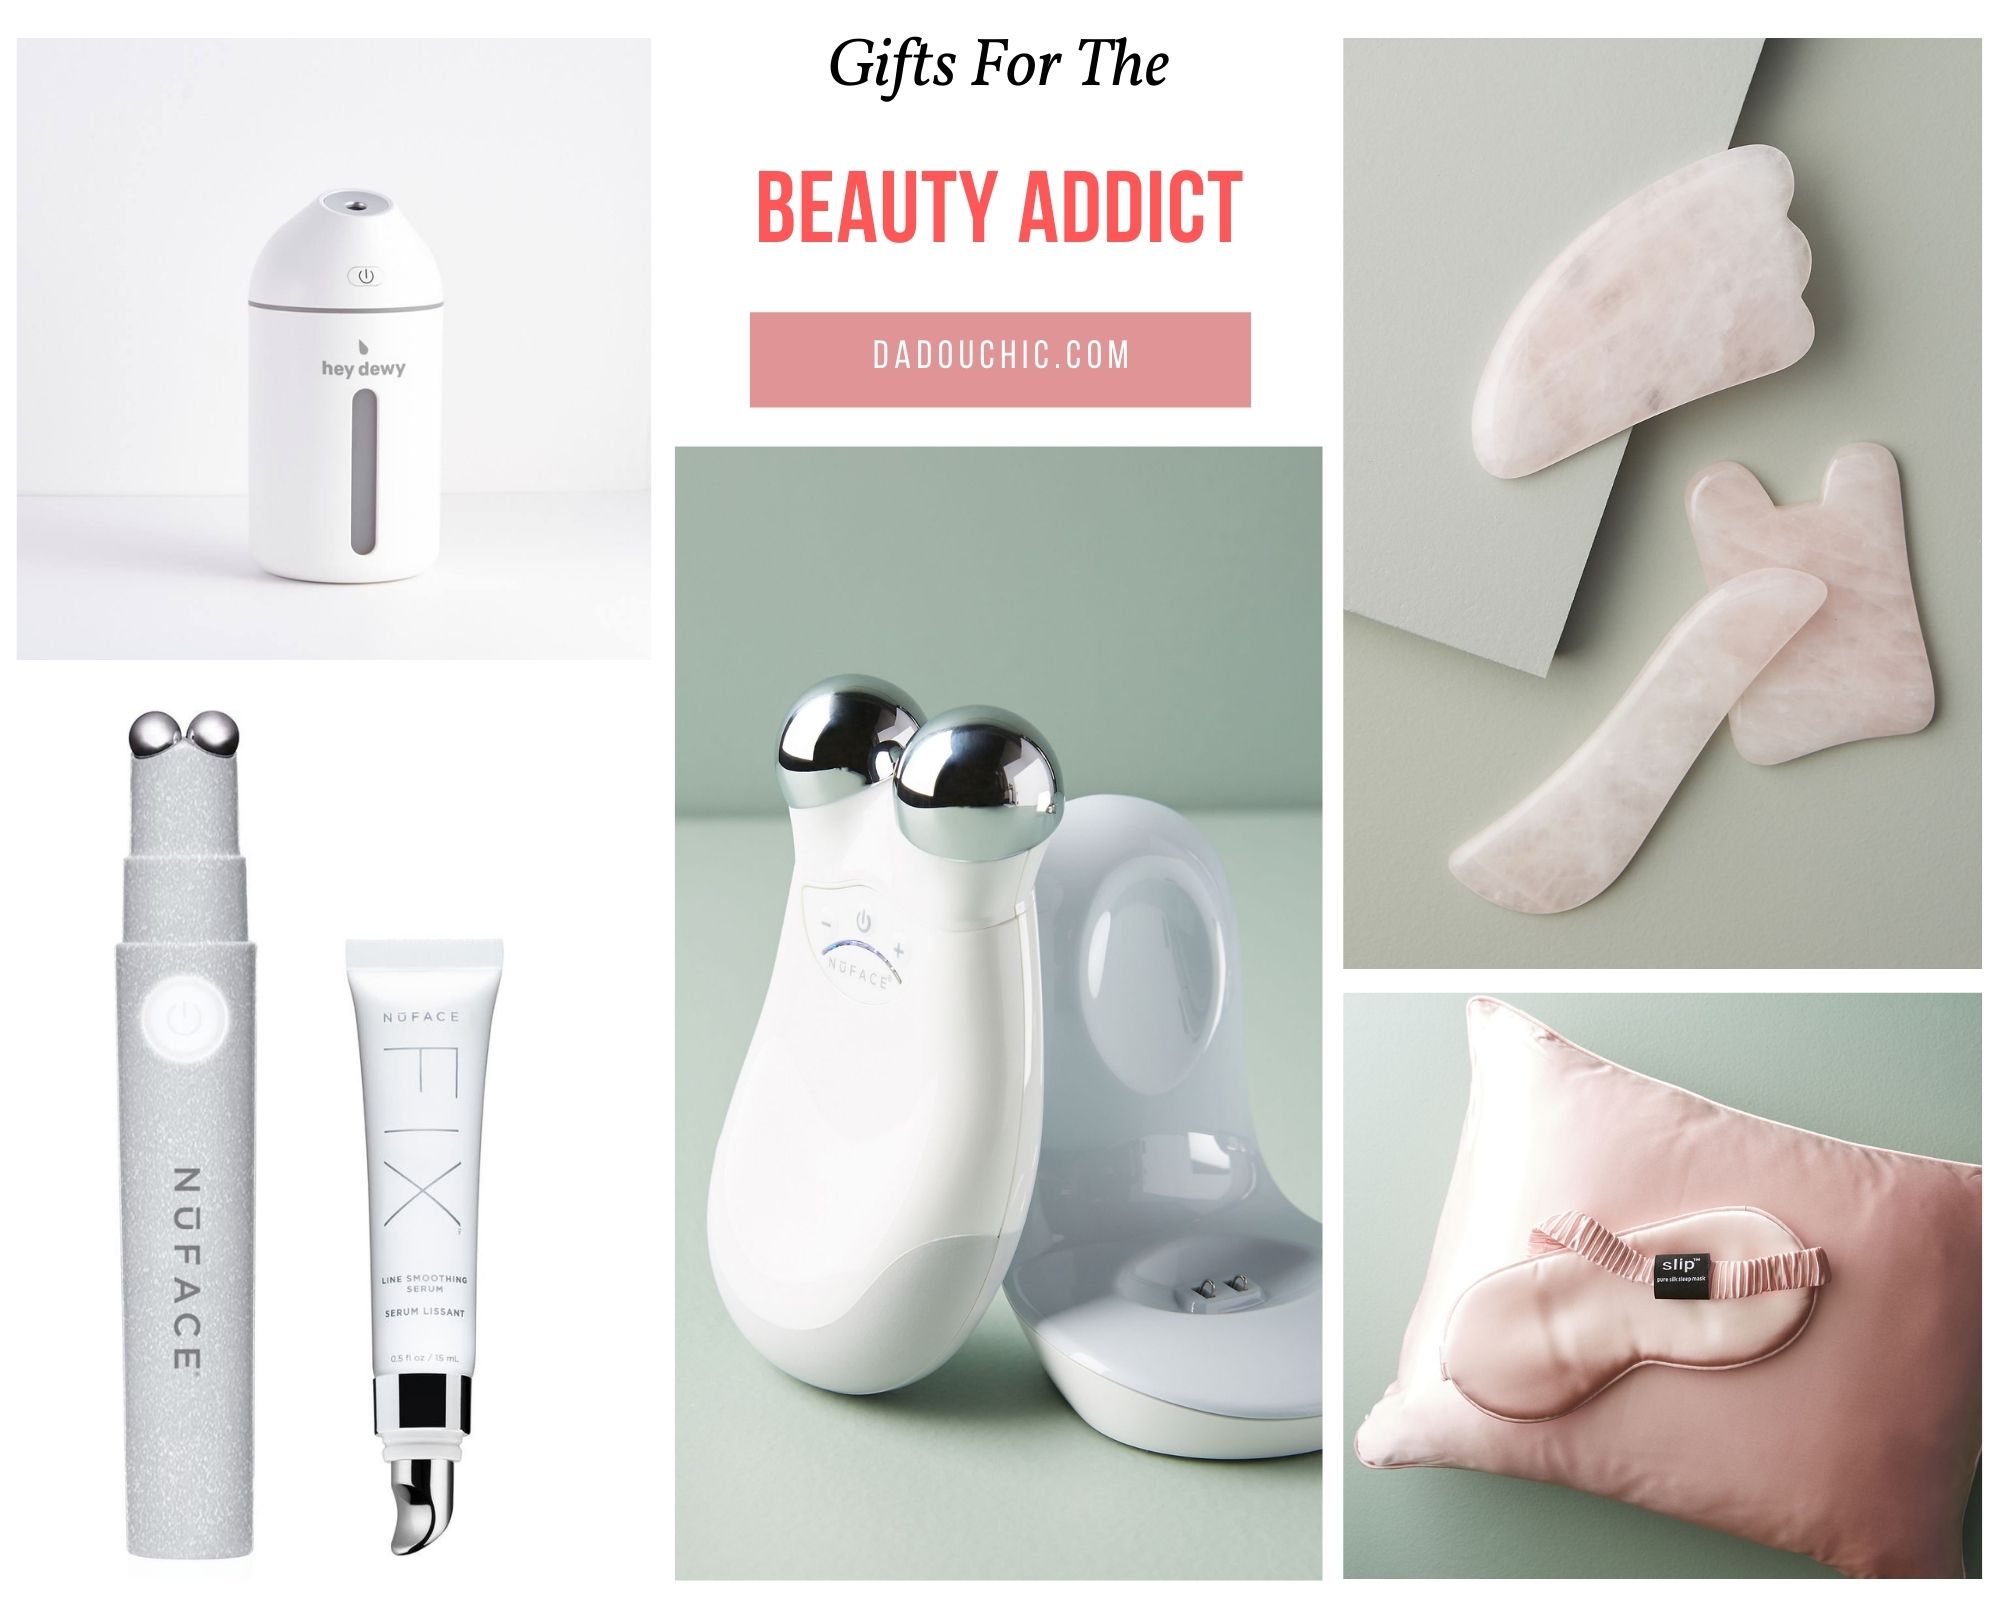 Gift Guide For The Skincare/Beauty Addict